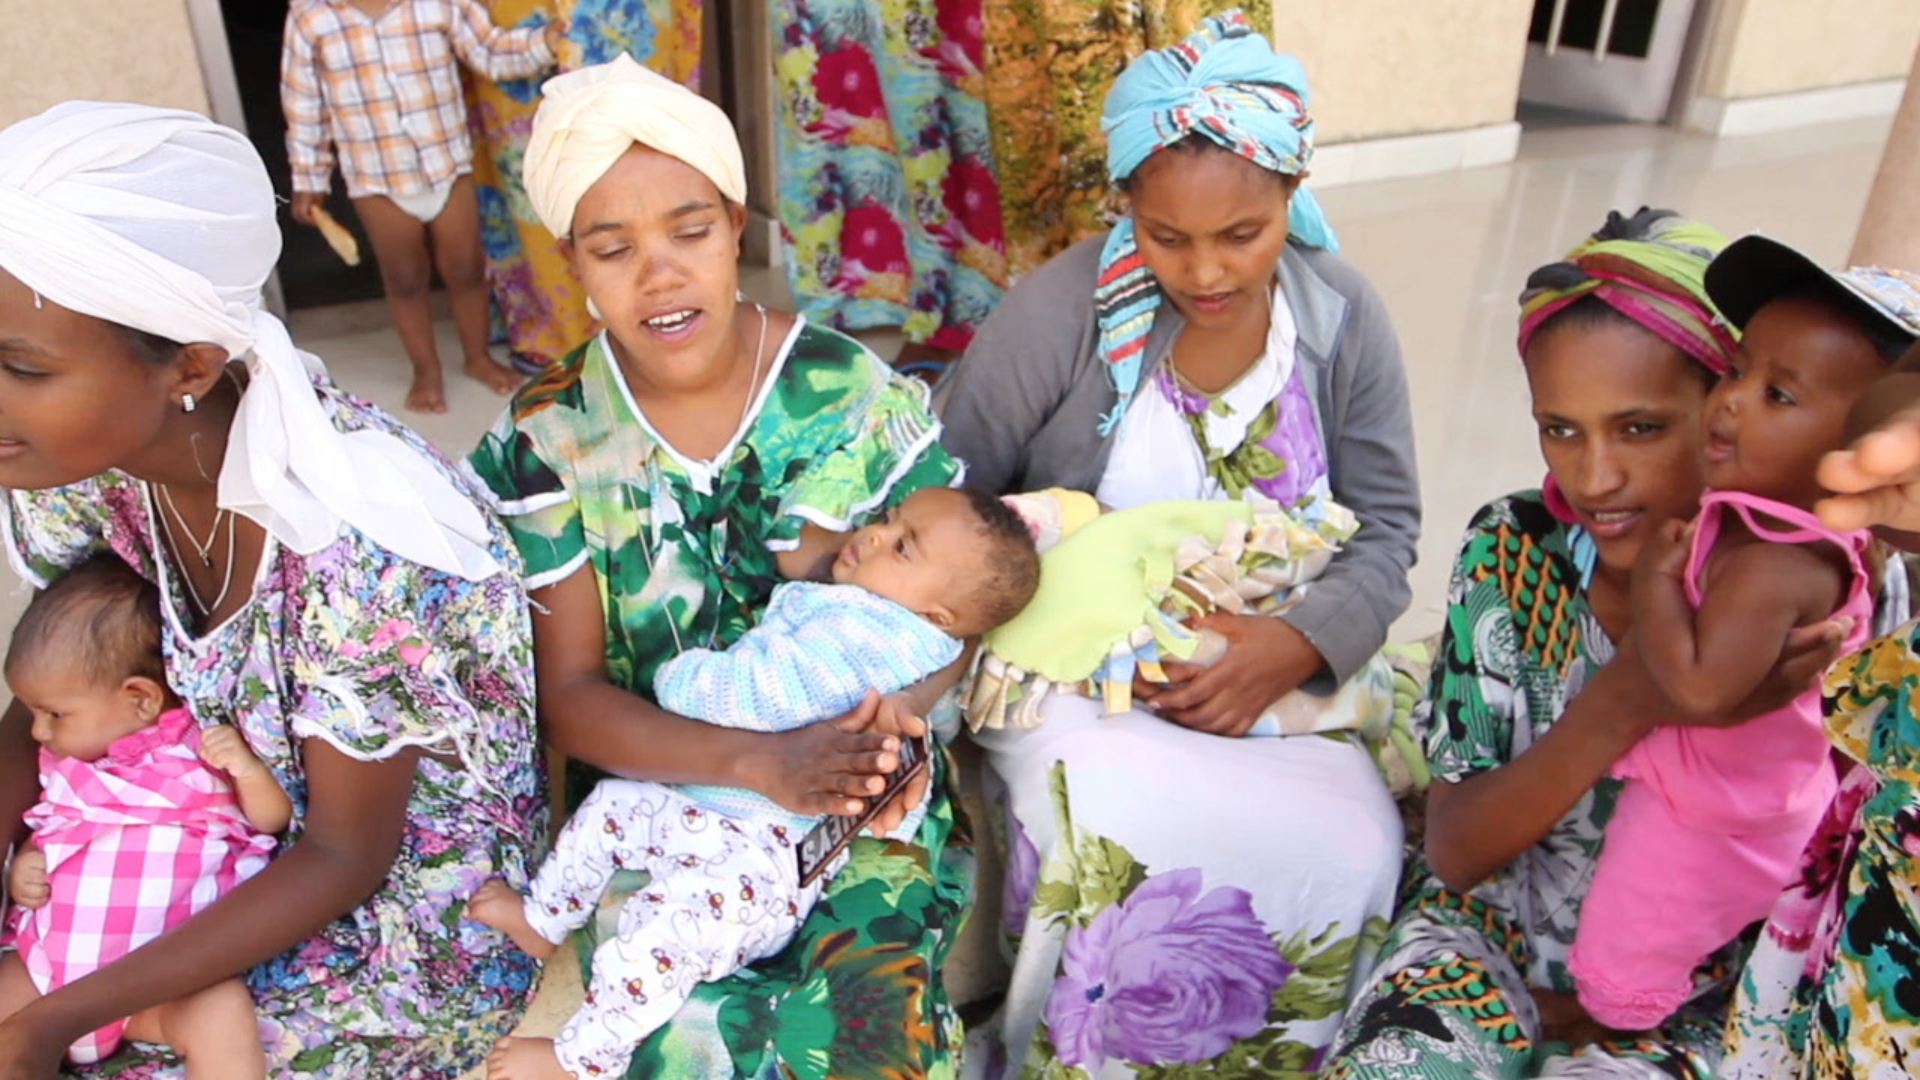 Women and babies at Living Hope Maternity in Ethiopia